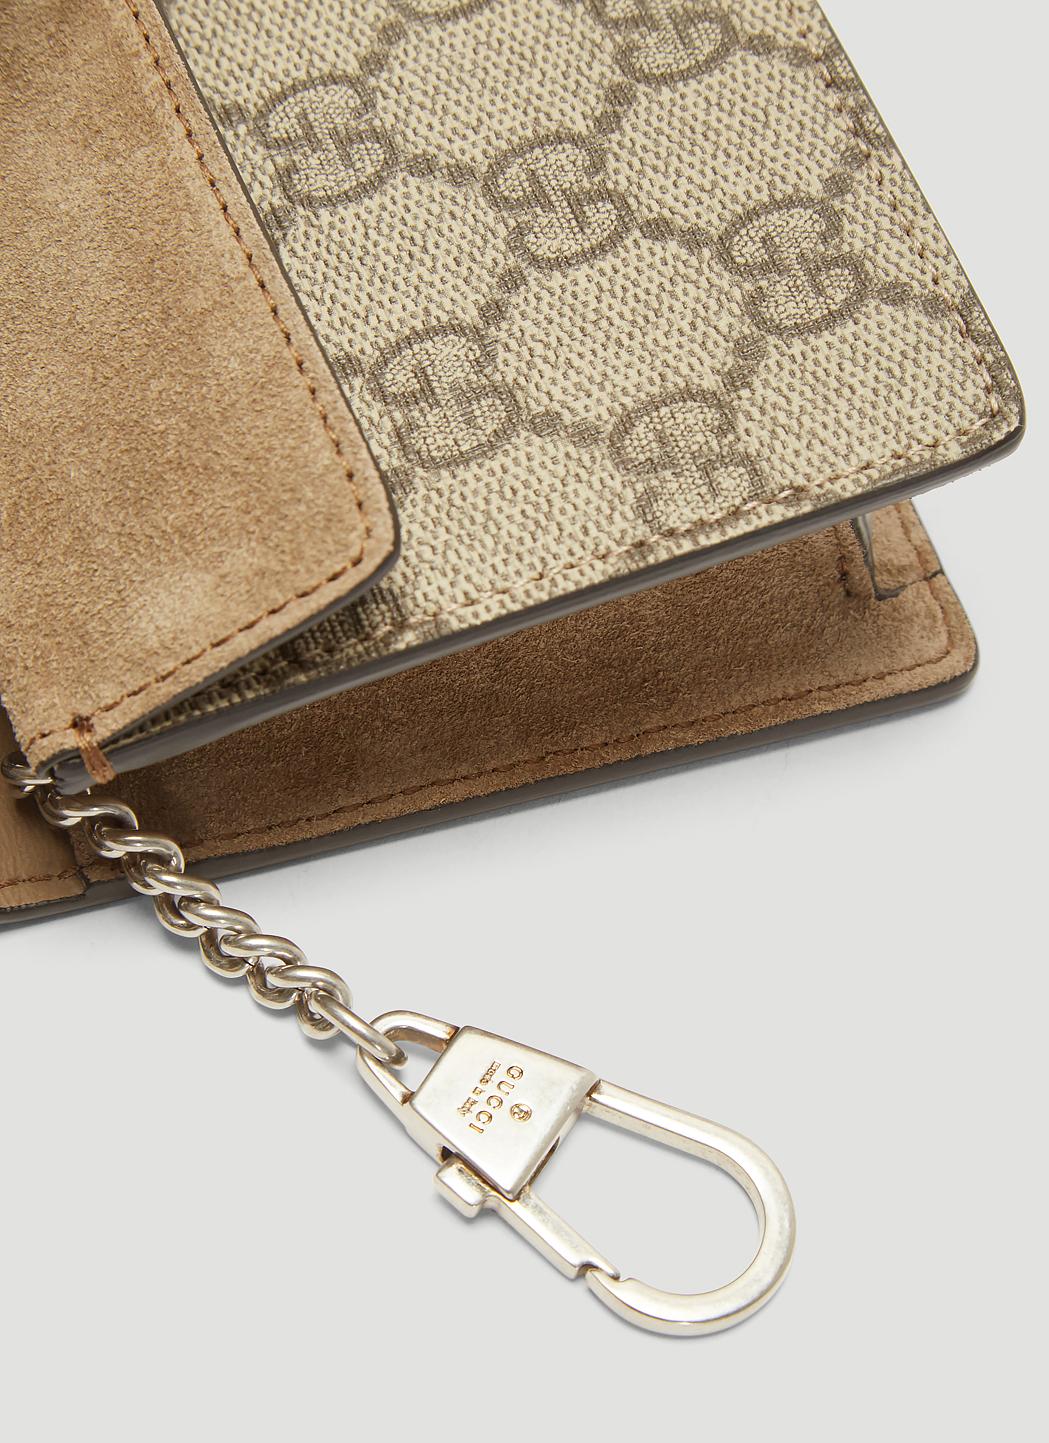 Gucci Dionsysus GG Logo Chain Wallet In Brown in Brown - Lyst